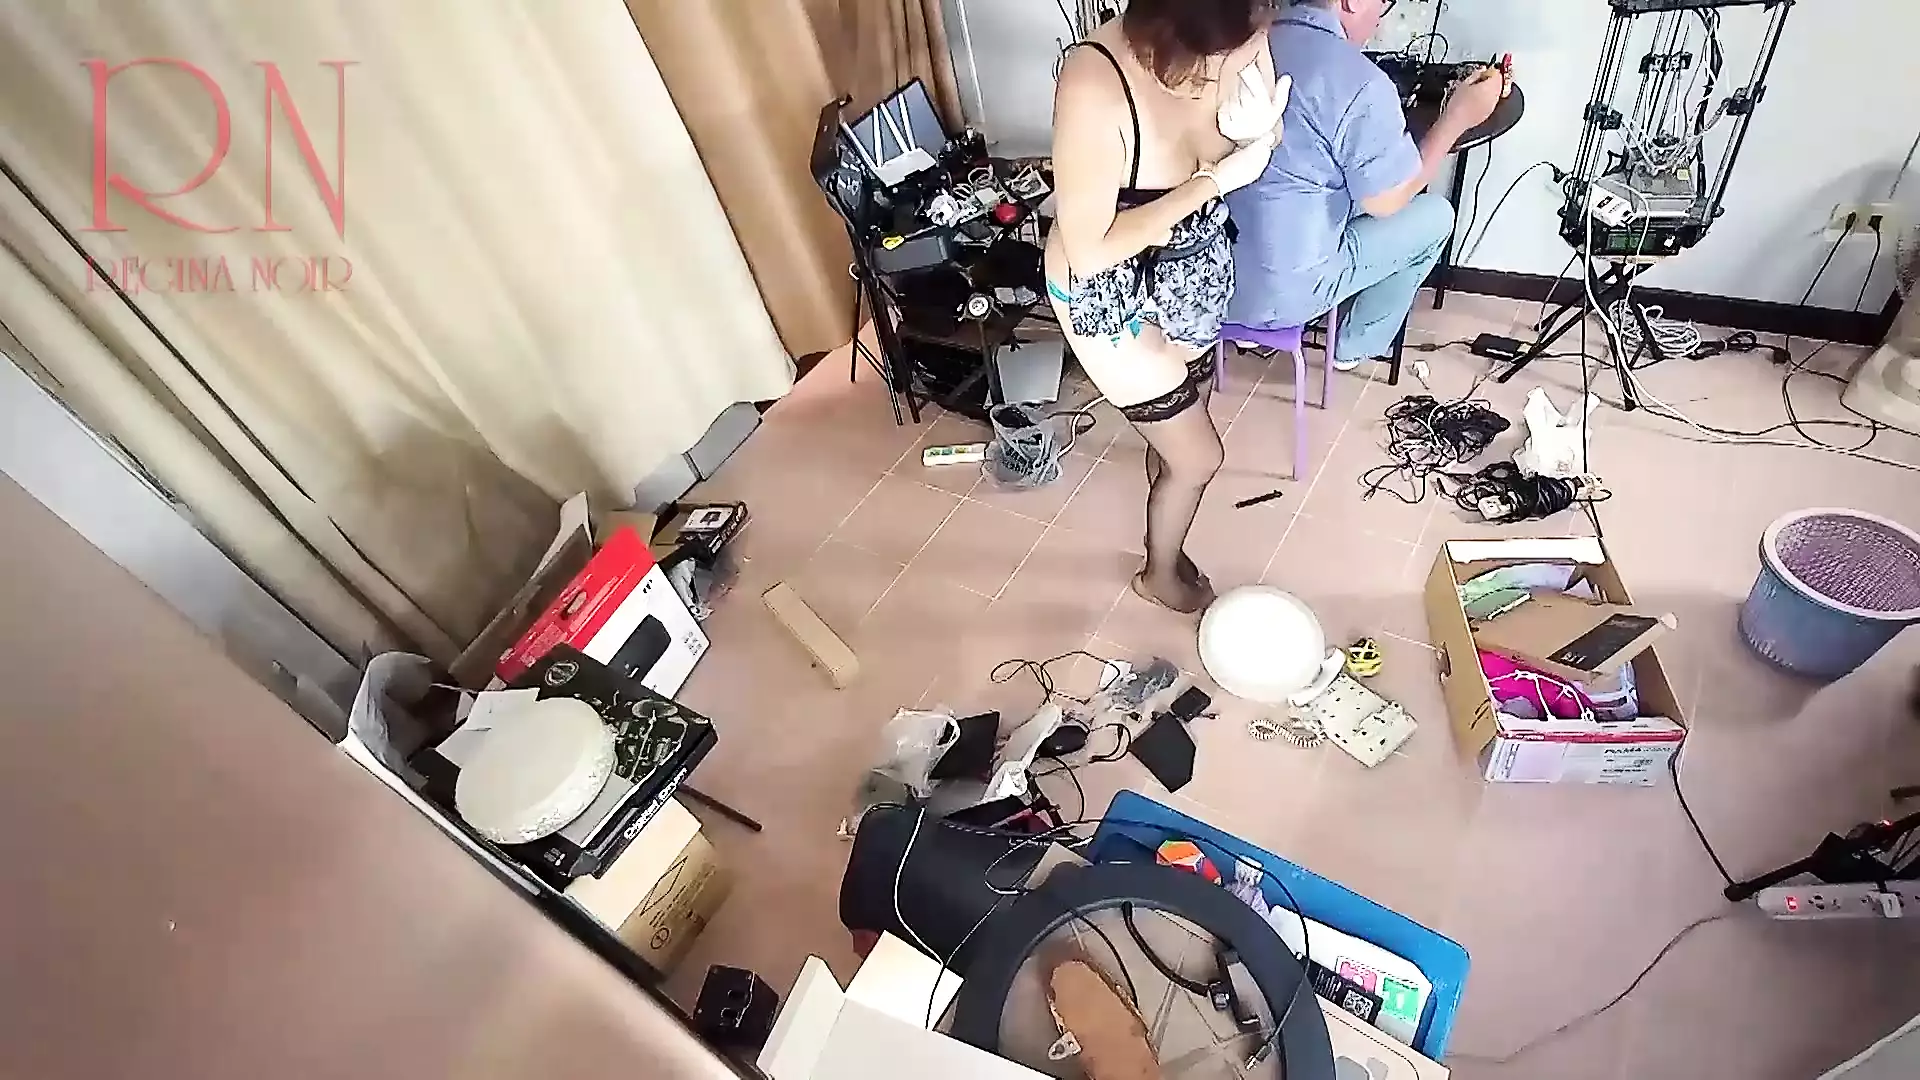 A naked maid is cleaning up in an stupid IT engineers office